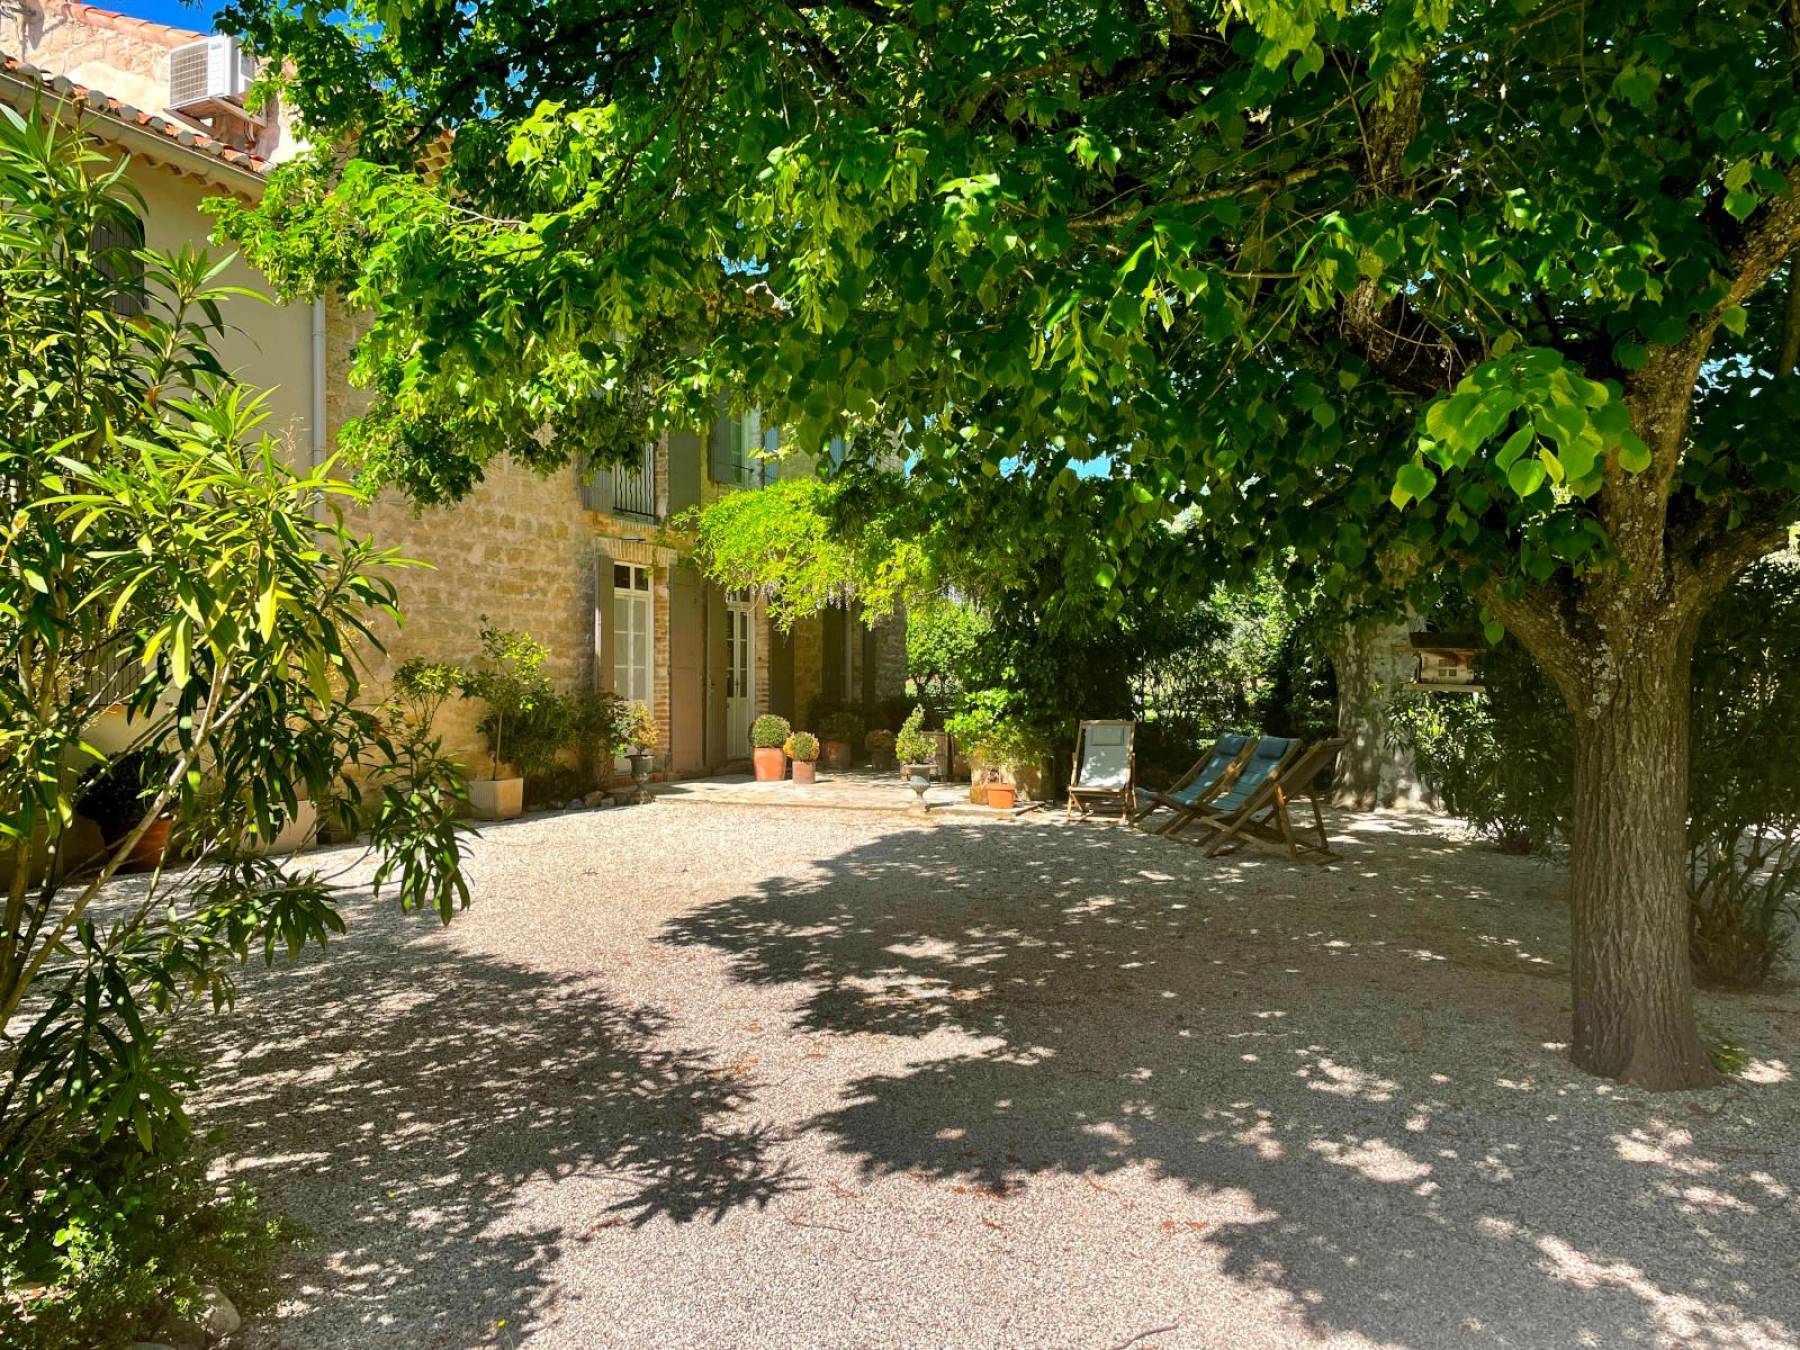 EXCLUSIVE SALE - Sale in Ventoux, 17th-century Mas entirely renovated in the heart of a park with pool